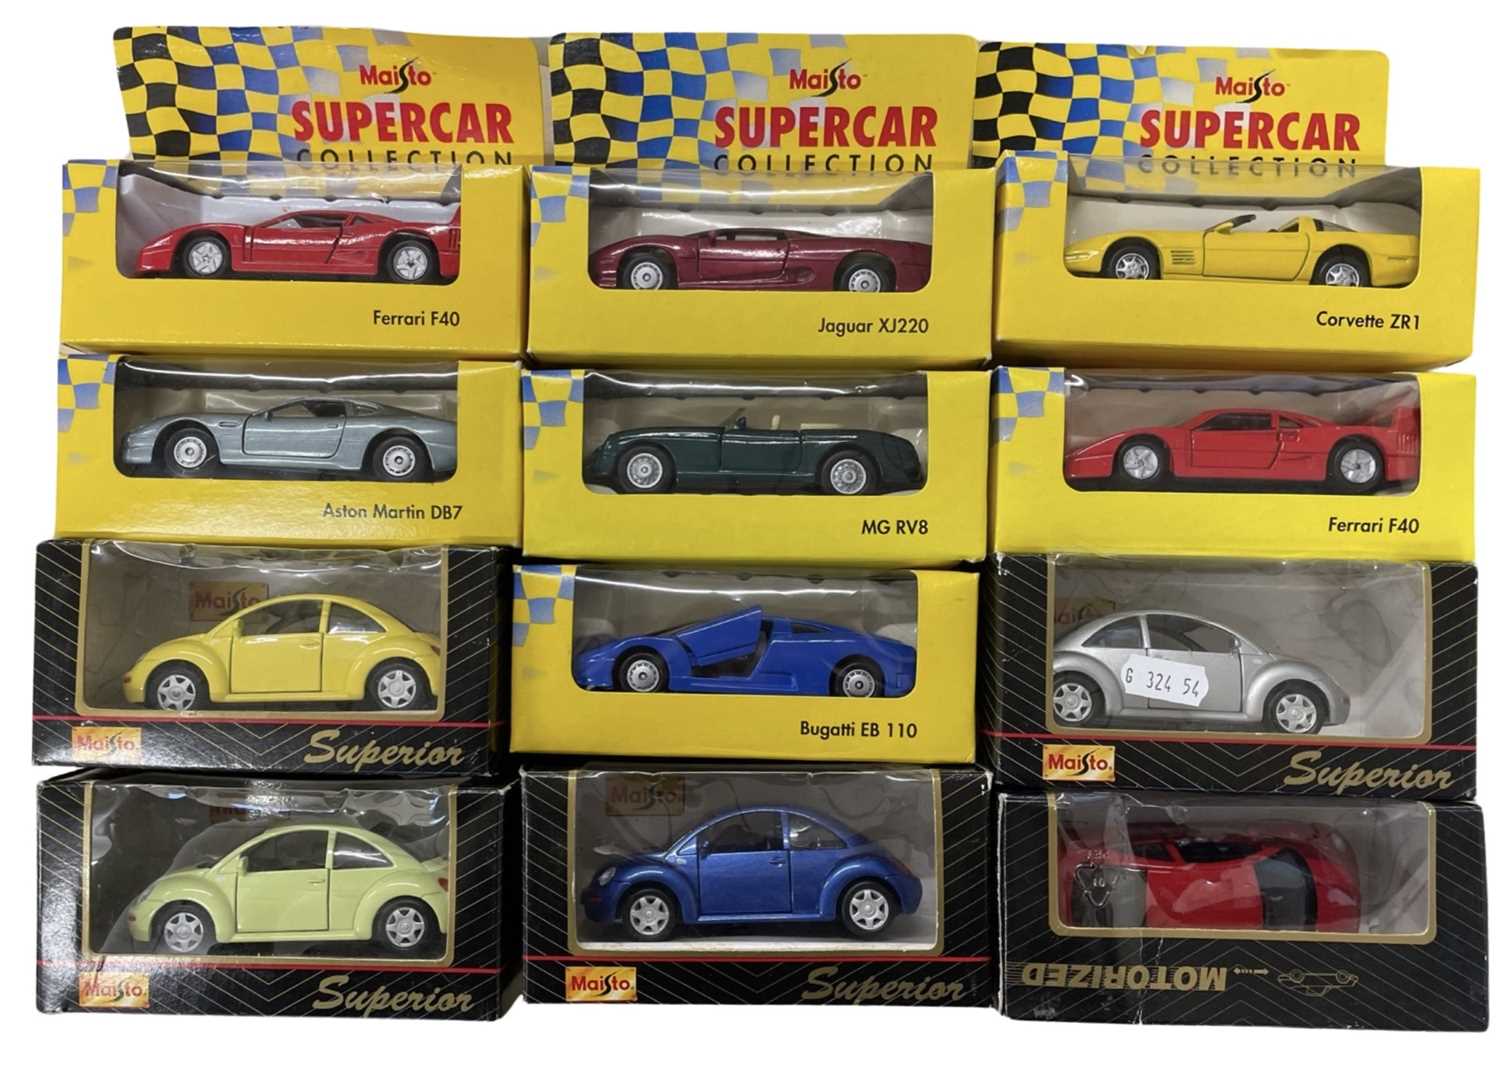 A collection of various Maisto miniature die-cast sports car models.